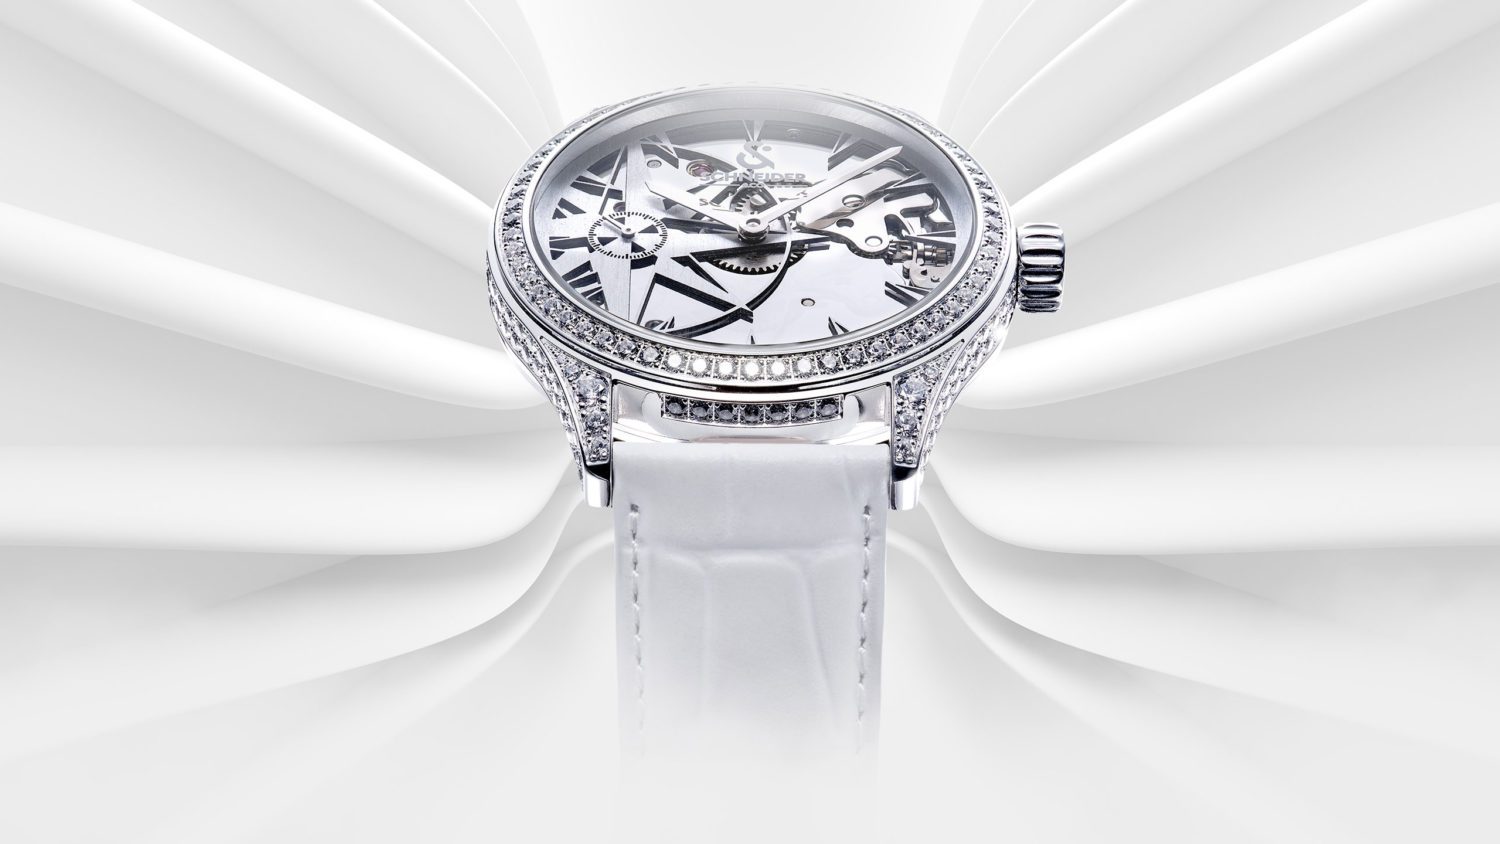 Our first women's watch, with polished movement, set bezel and lugs, decorated "bubble" case.